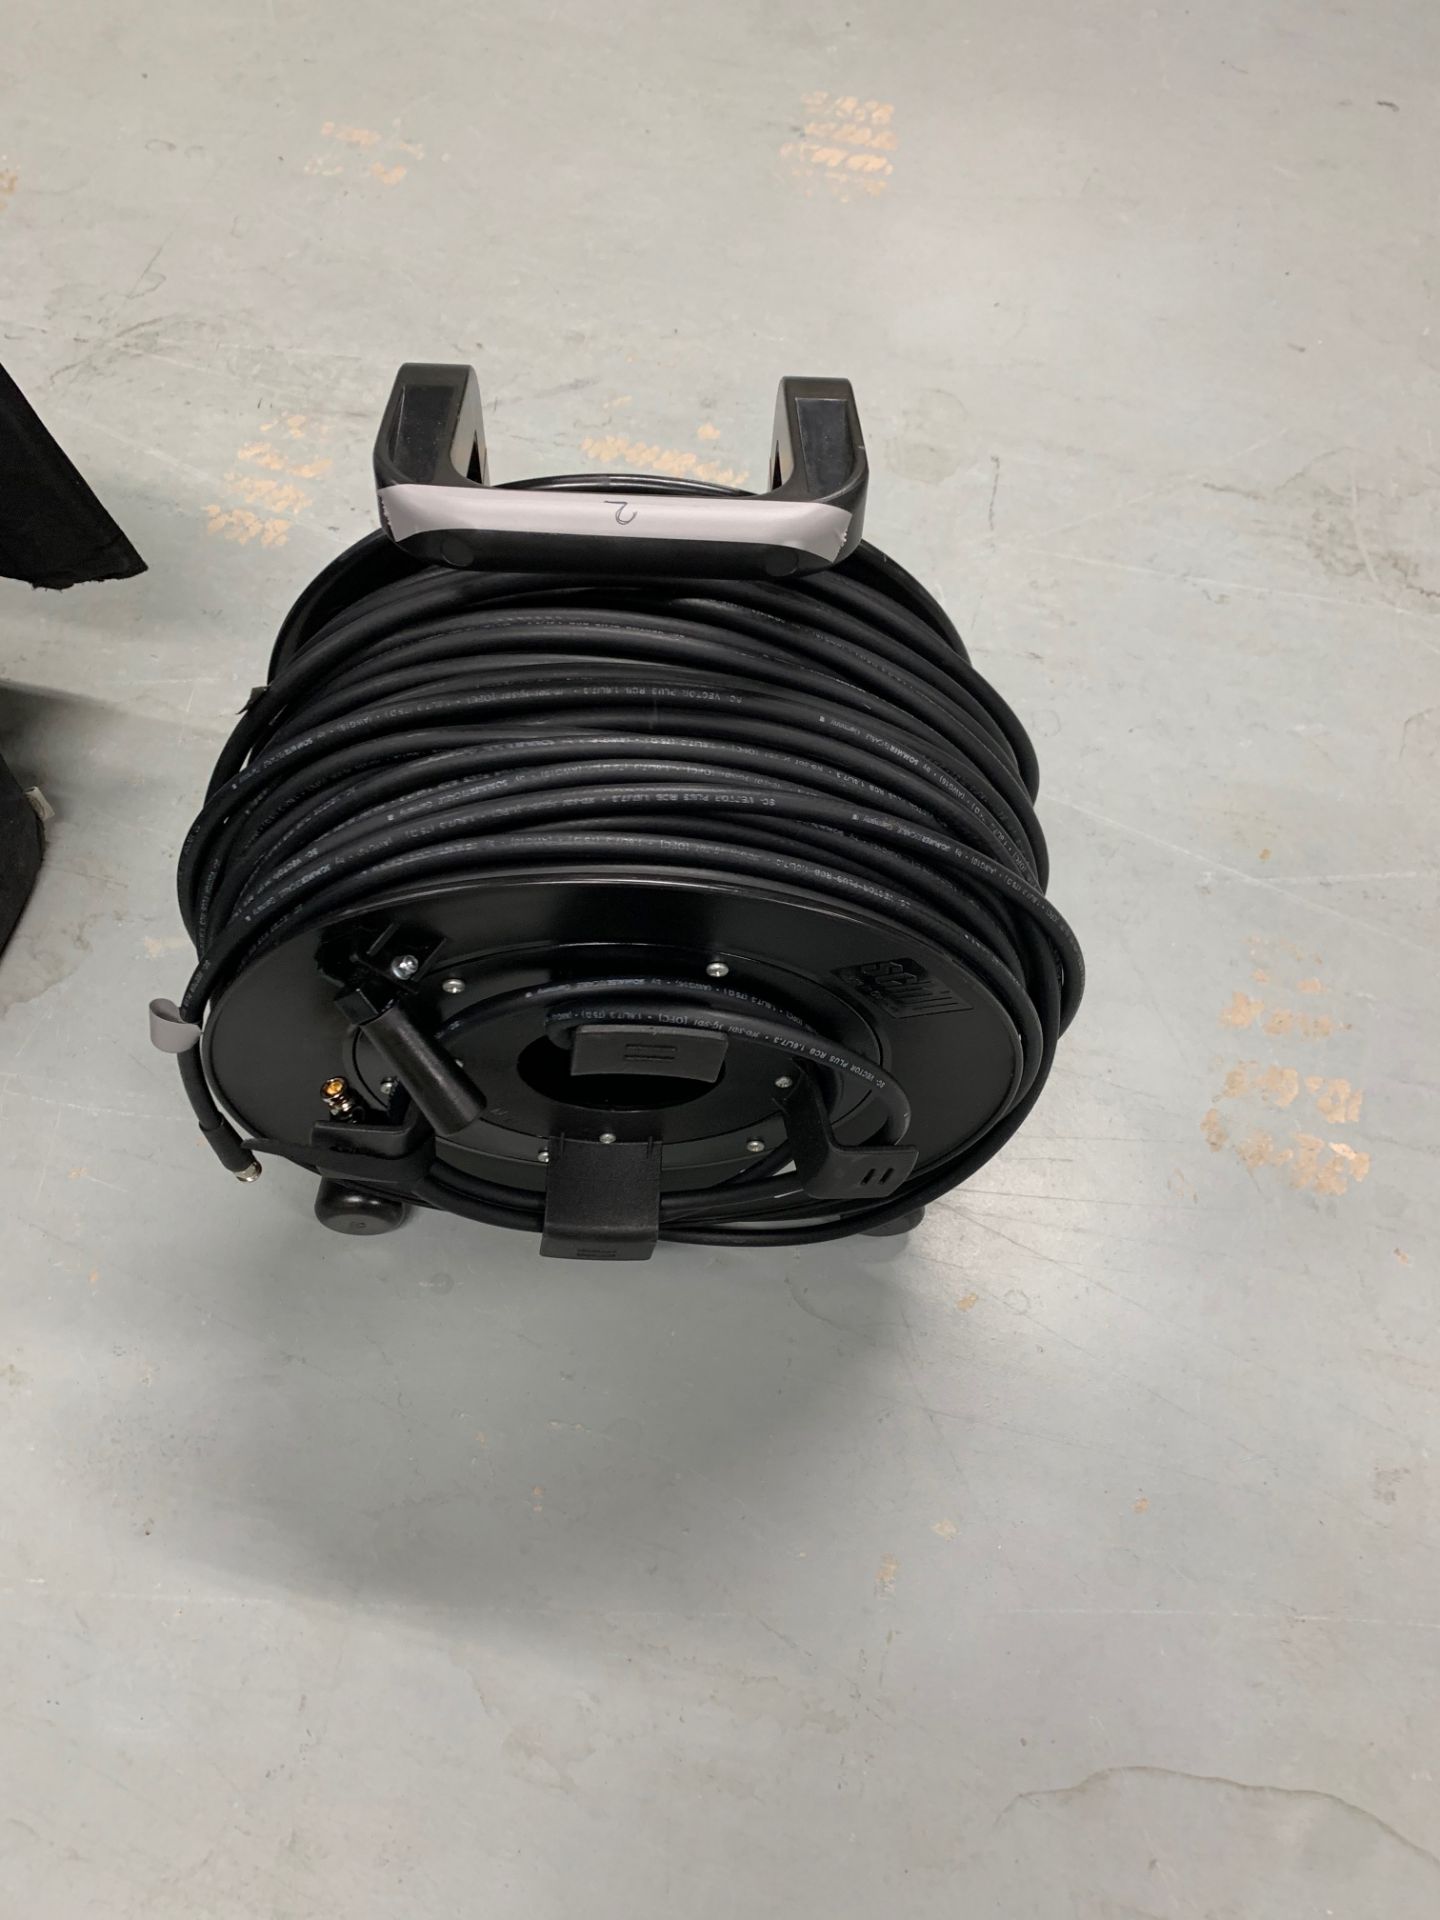 100m SDI Cable on a Drum in Bag - Image 2 of 3